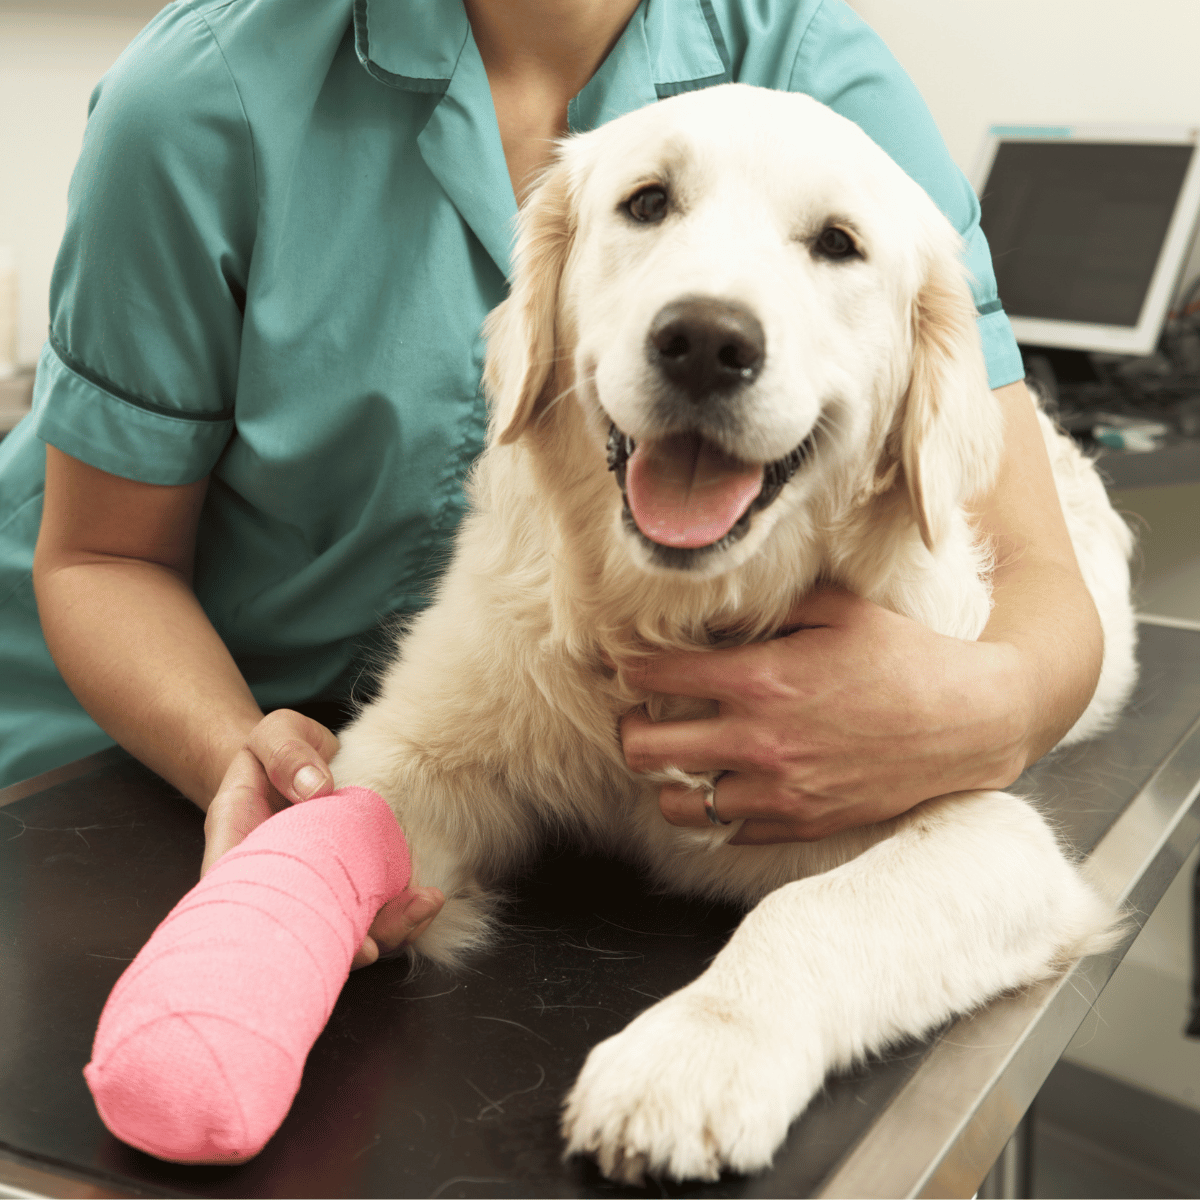 a person holding a dog injured leg